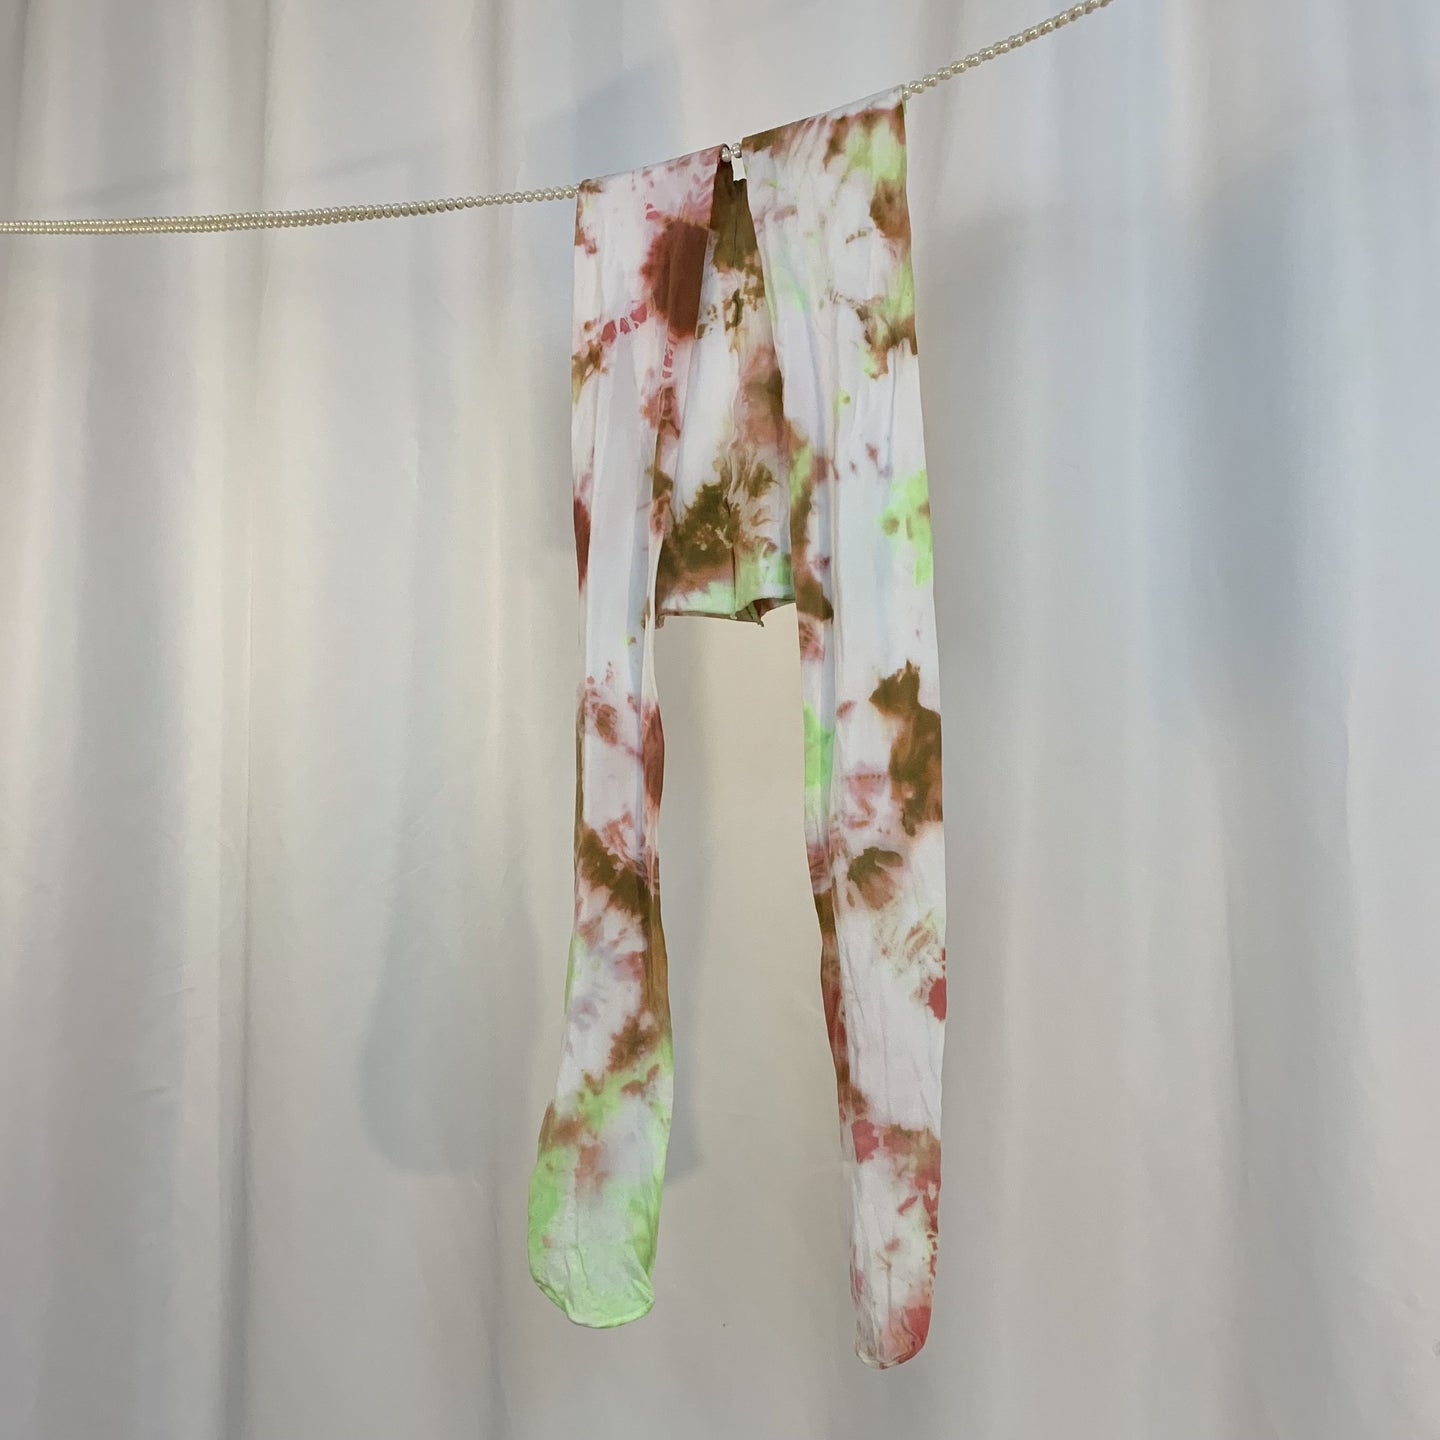 Recycled canyon tie dye tights